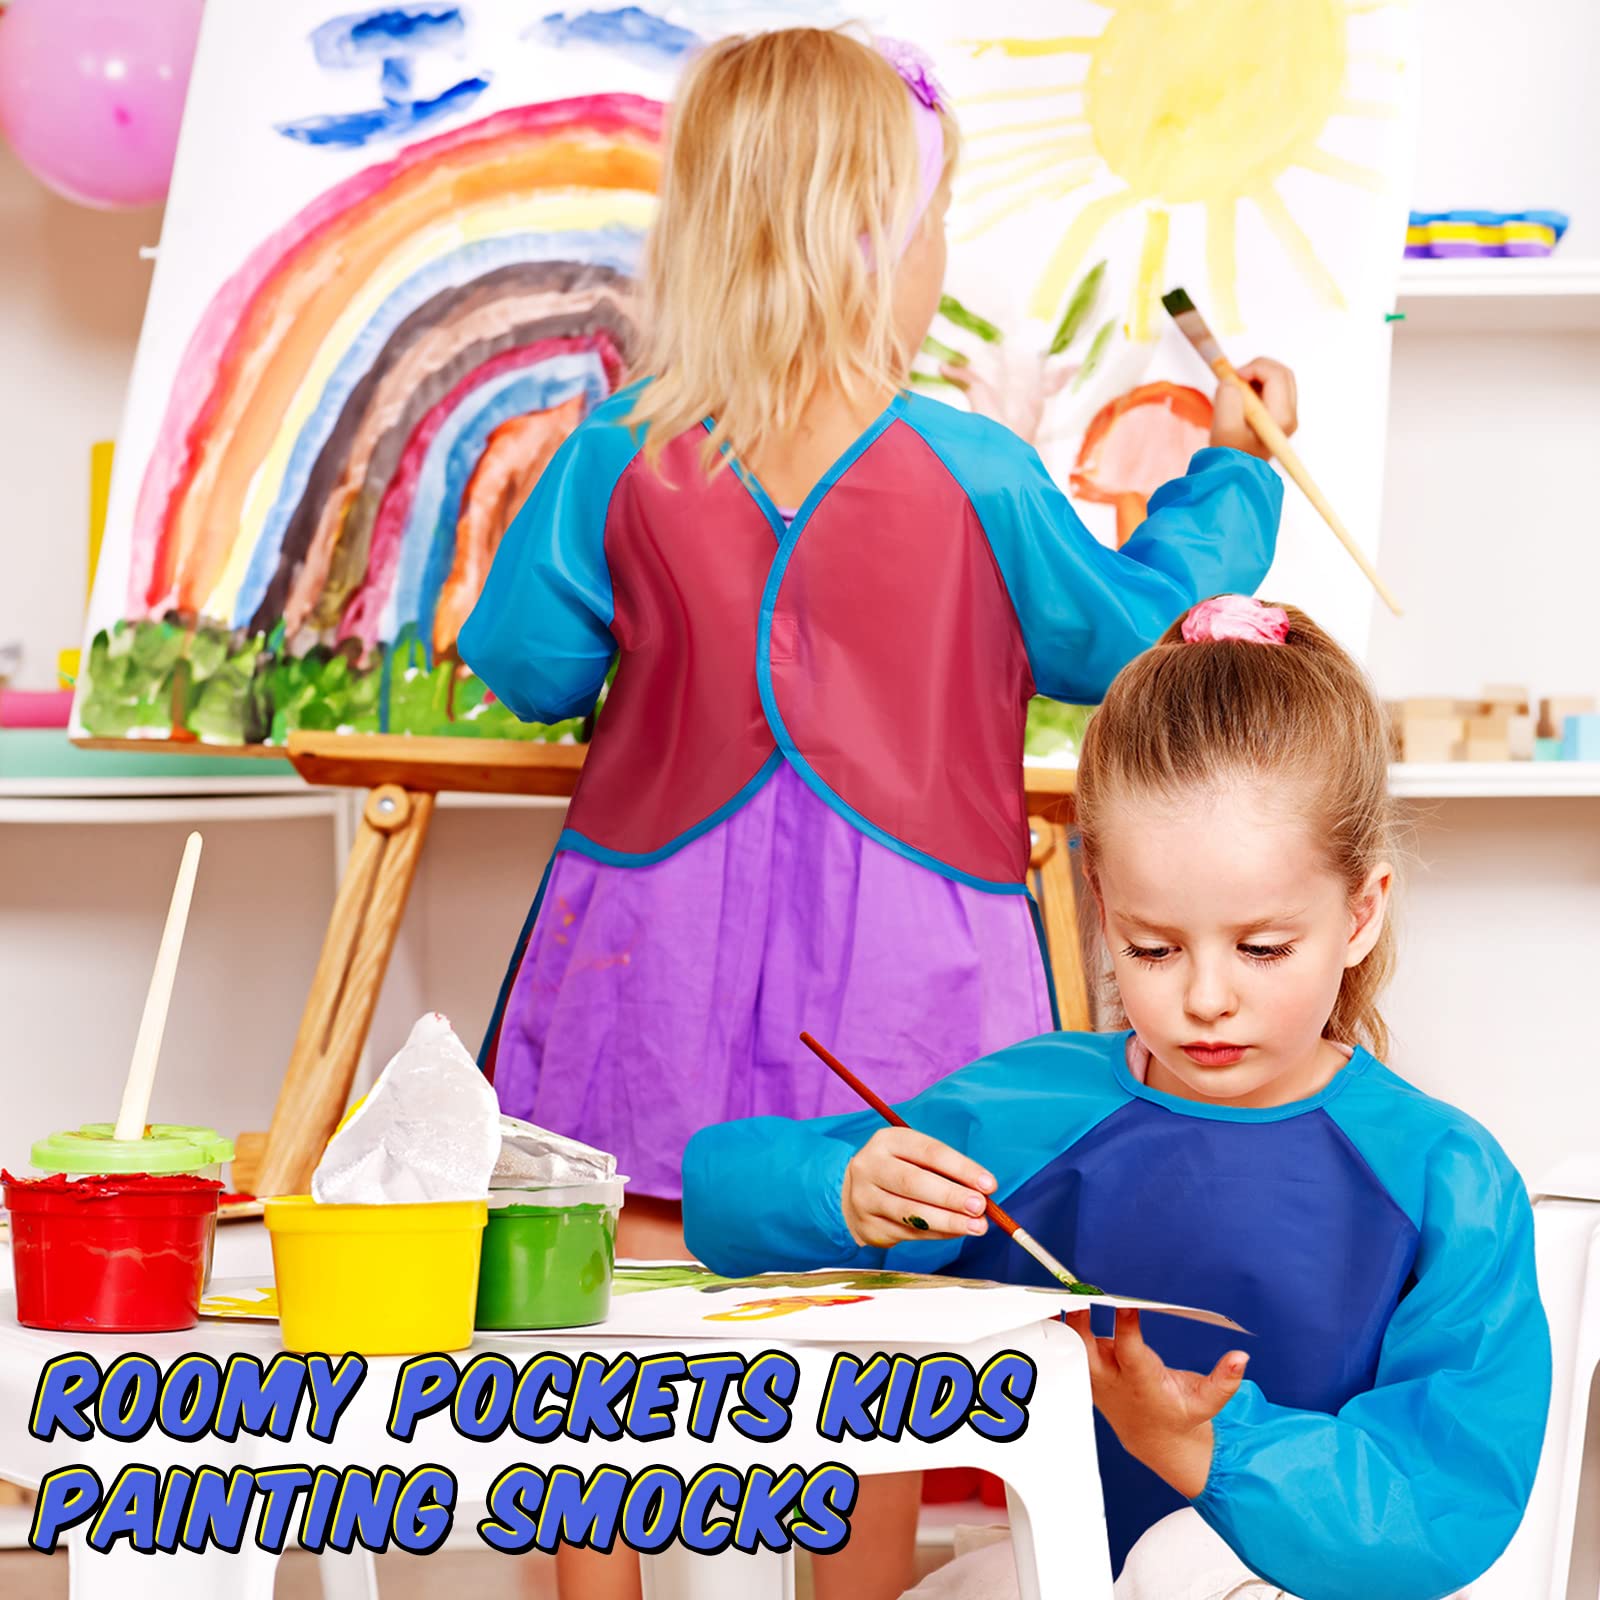 36 Pcs Kids Art Smocks Waterproof Toddler Painting Smocks Children Artist Apron Long Sleeve with 3 Pockets for Girl Boy Painting Supplies, Age 2-8 Years